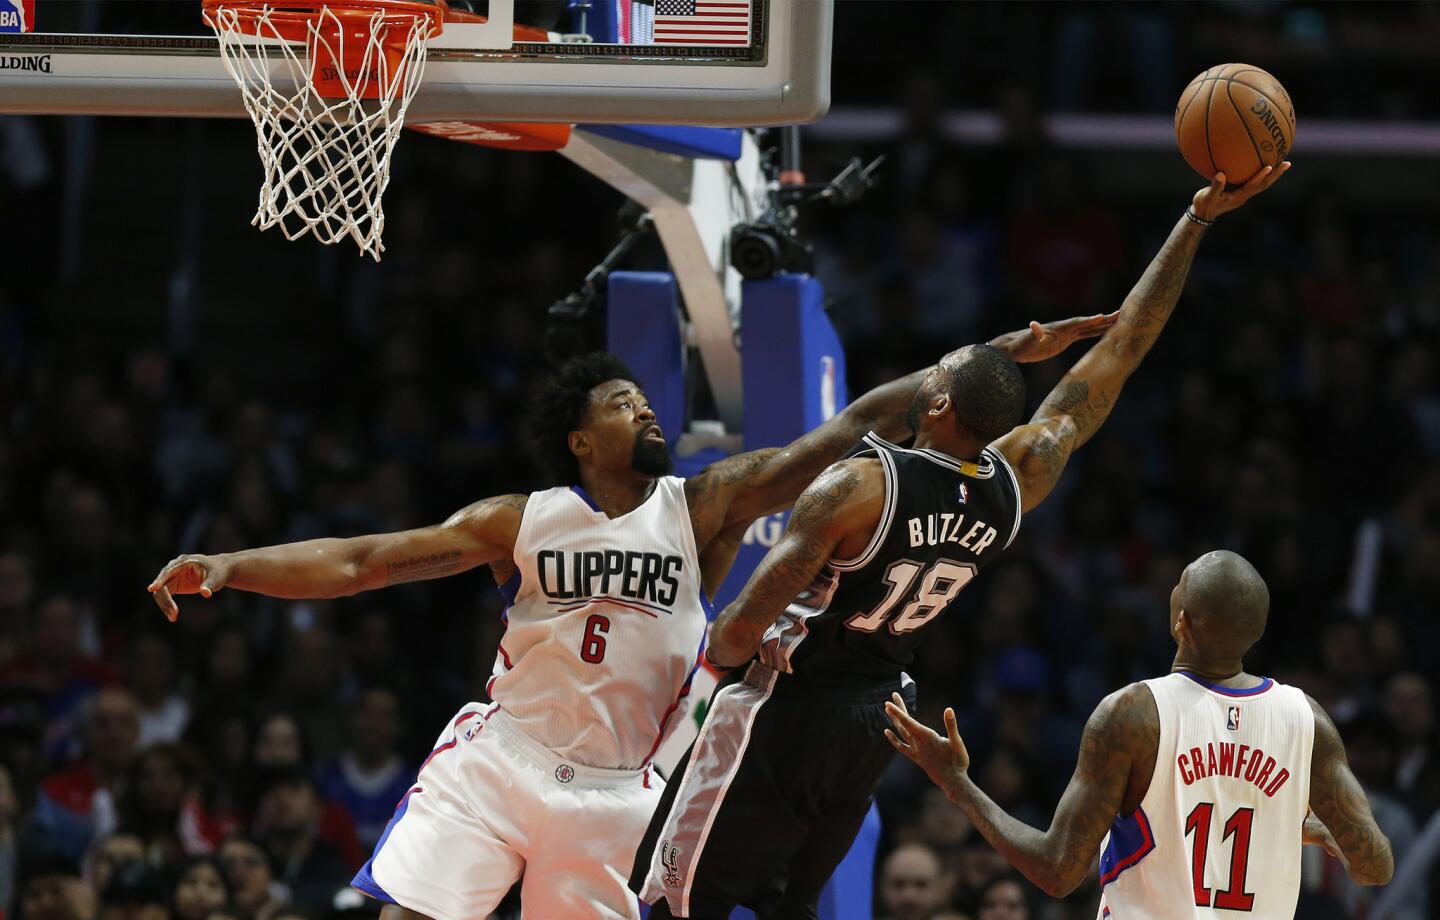 Clippers center DeAndre Jordan (6) forces Spurs forward Rasual Butler into an awkward shot during the second half Thursday night at Staples Center.